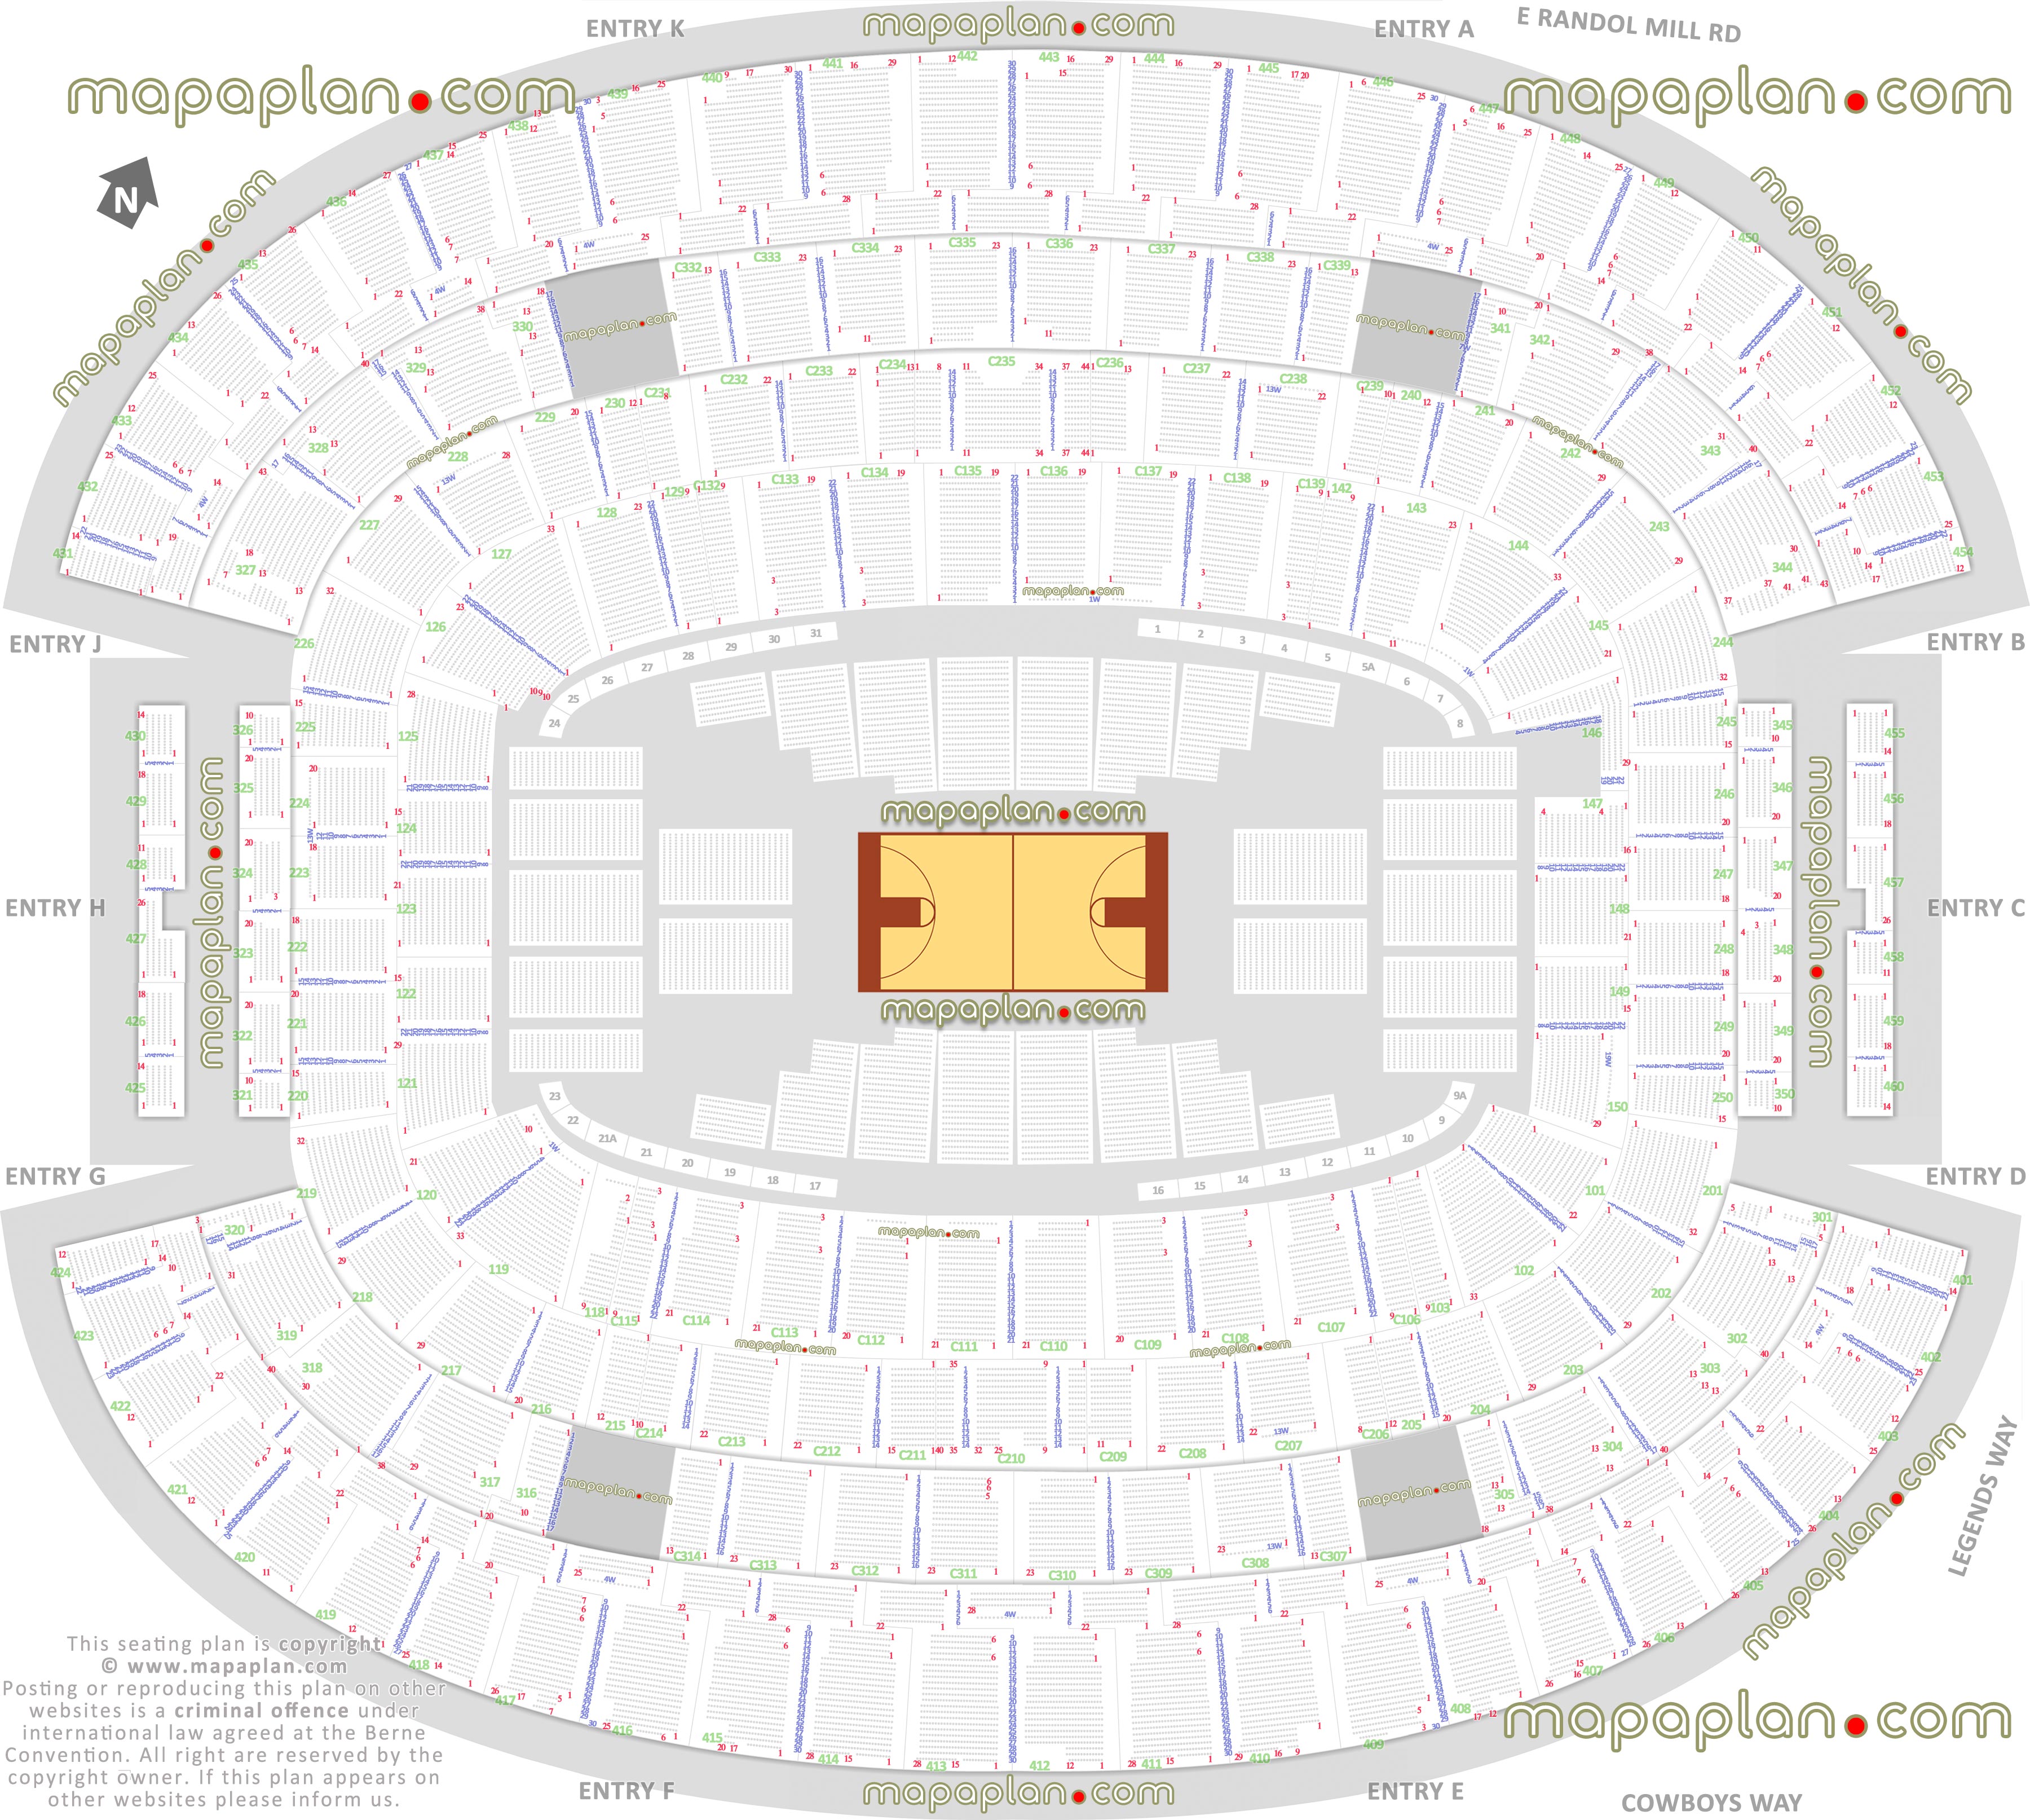 basketball ncaa tournament seating chart row max seat capacity numbers rows each section texas arlington new stadium detailed floor plan hall fame main upper concourse levels club party suites mezzanine sections 301 302 303 304 305 306 307 308 309 310 311 312 313 314 315 316 317 318 319 320 321 322 323 324 325 326 327 328 329 330 333 334 335 336 341 342 343 Dallas Cowboys AT&T Stadium seating chart